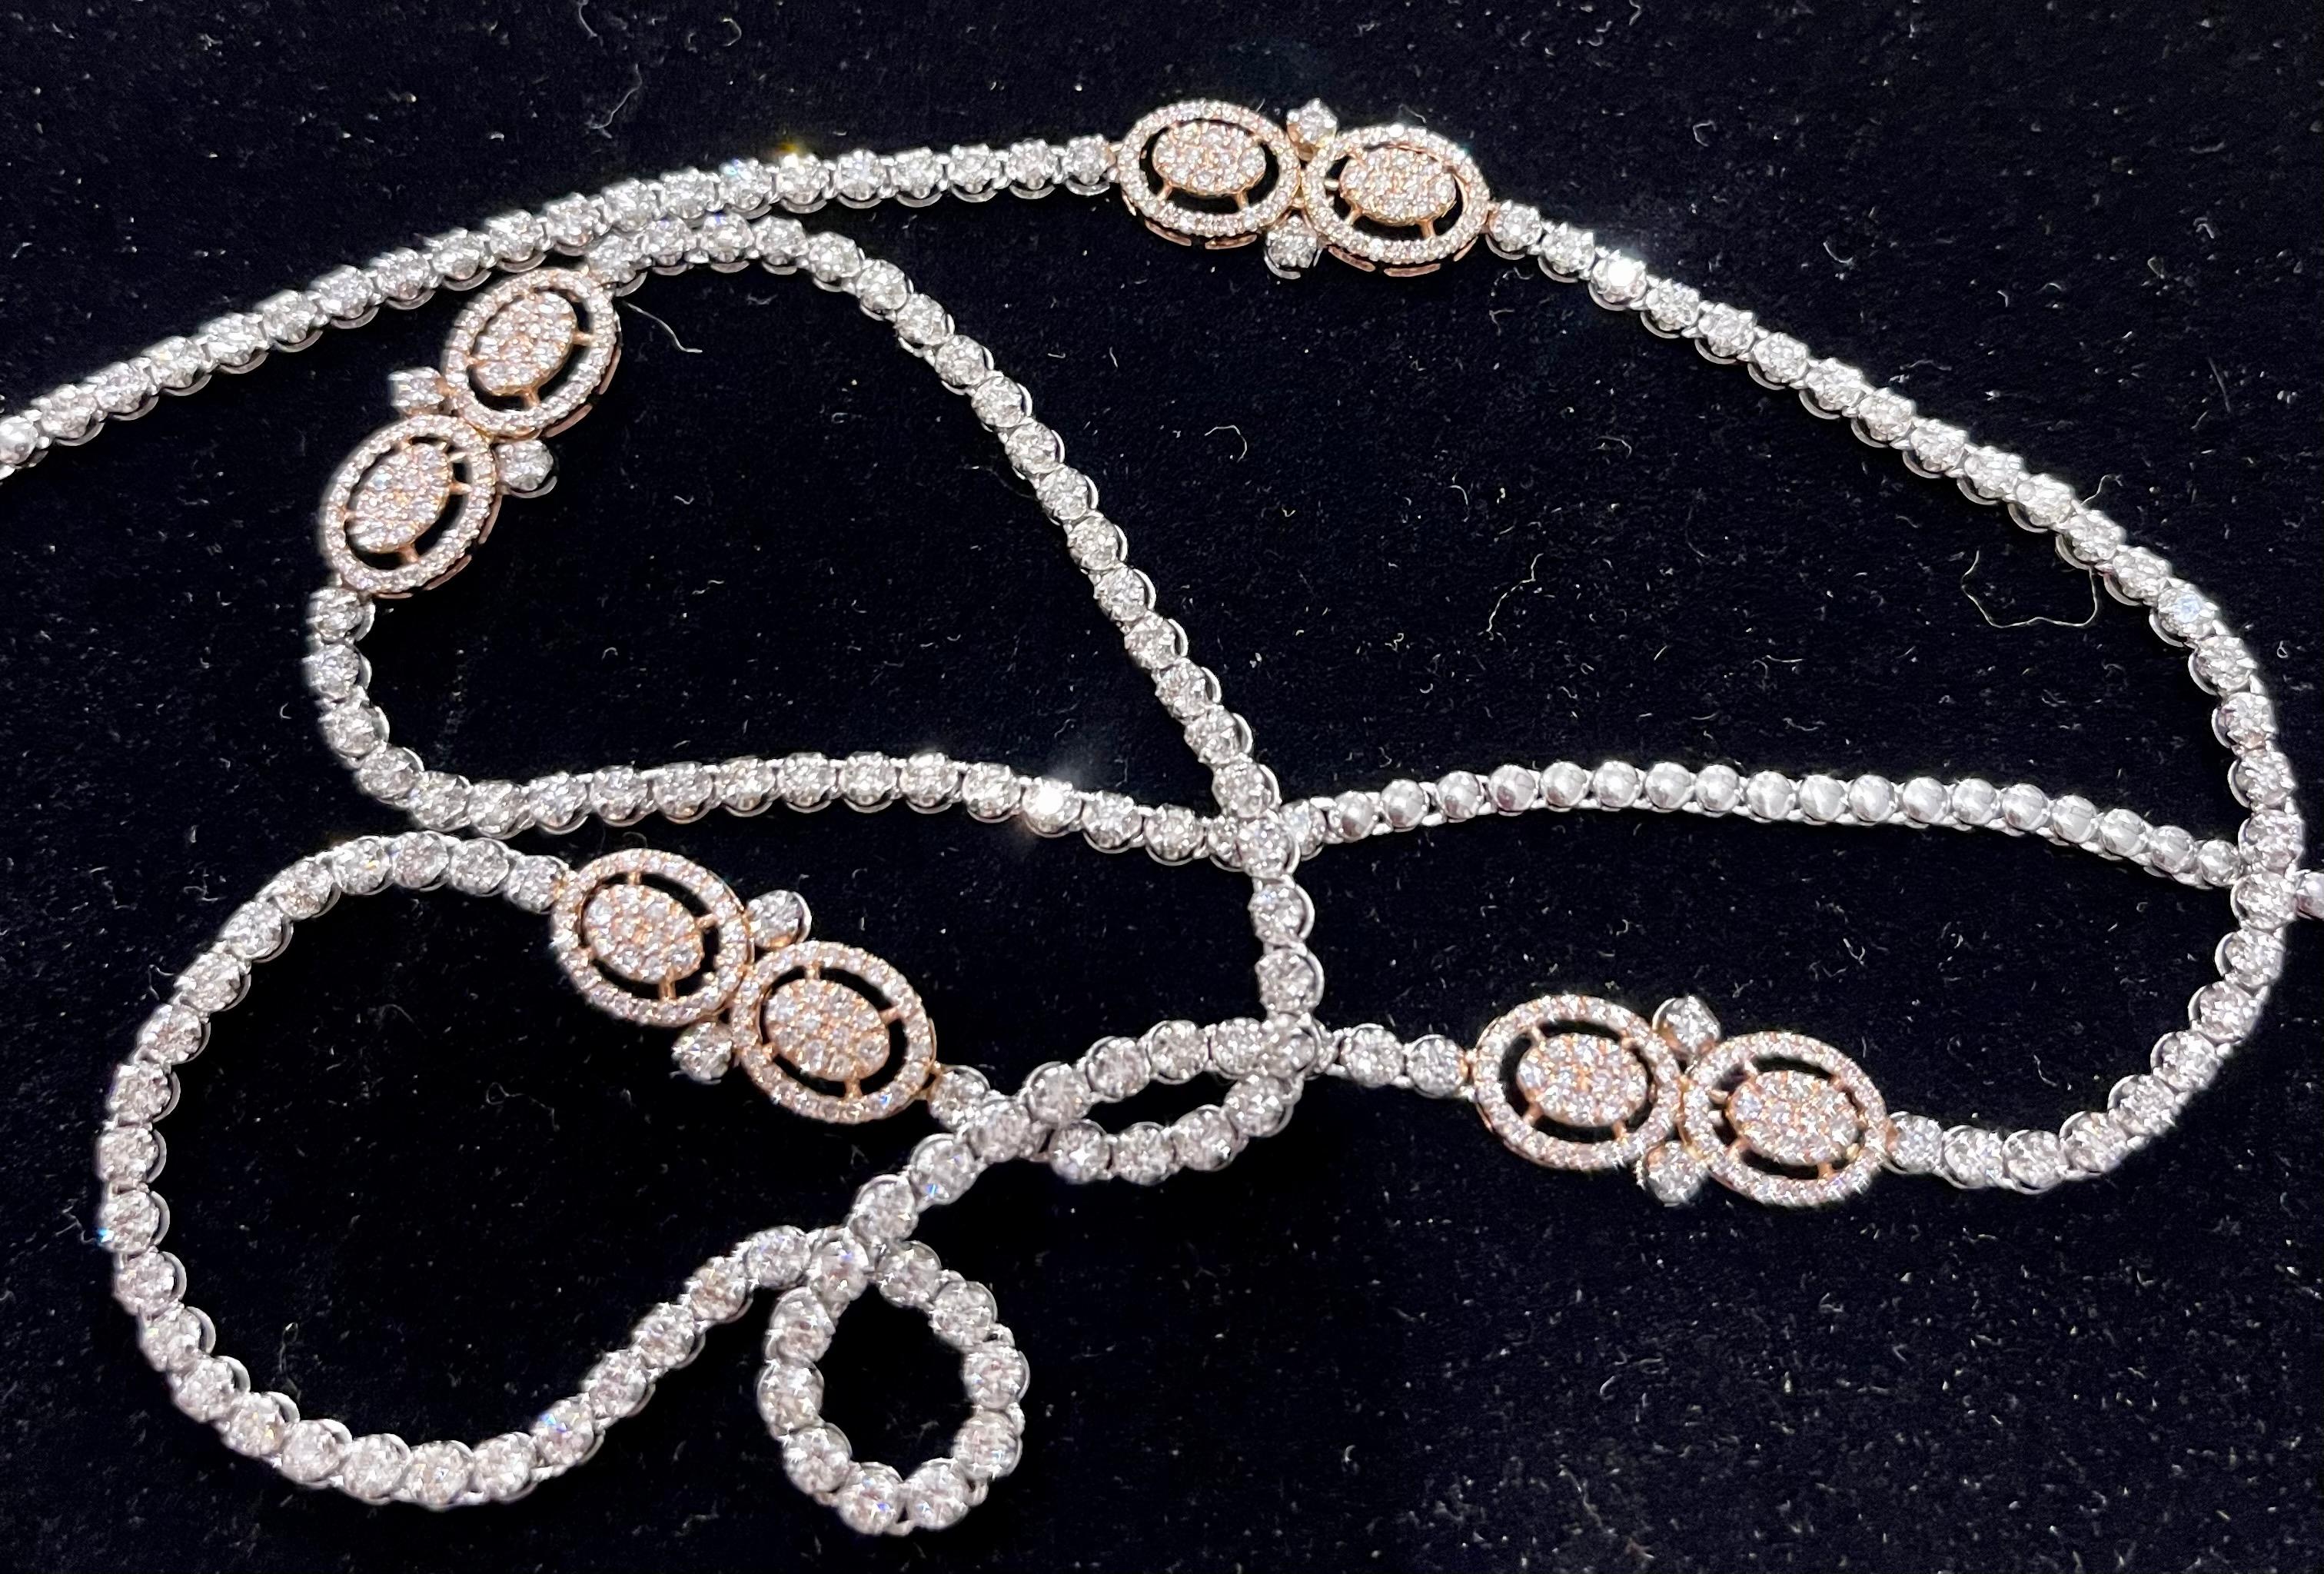 8 Ct Brilliant Cut Diamond Long Necklace in White & Pink 14 K Gold 27 Gm 11